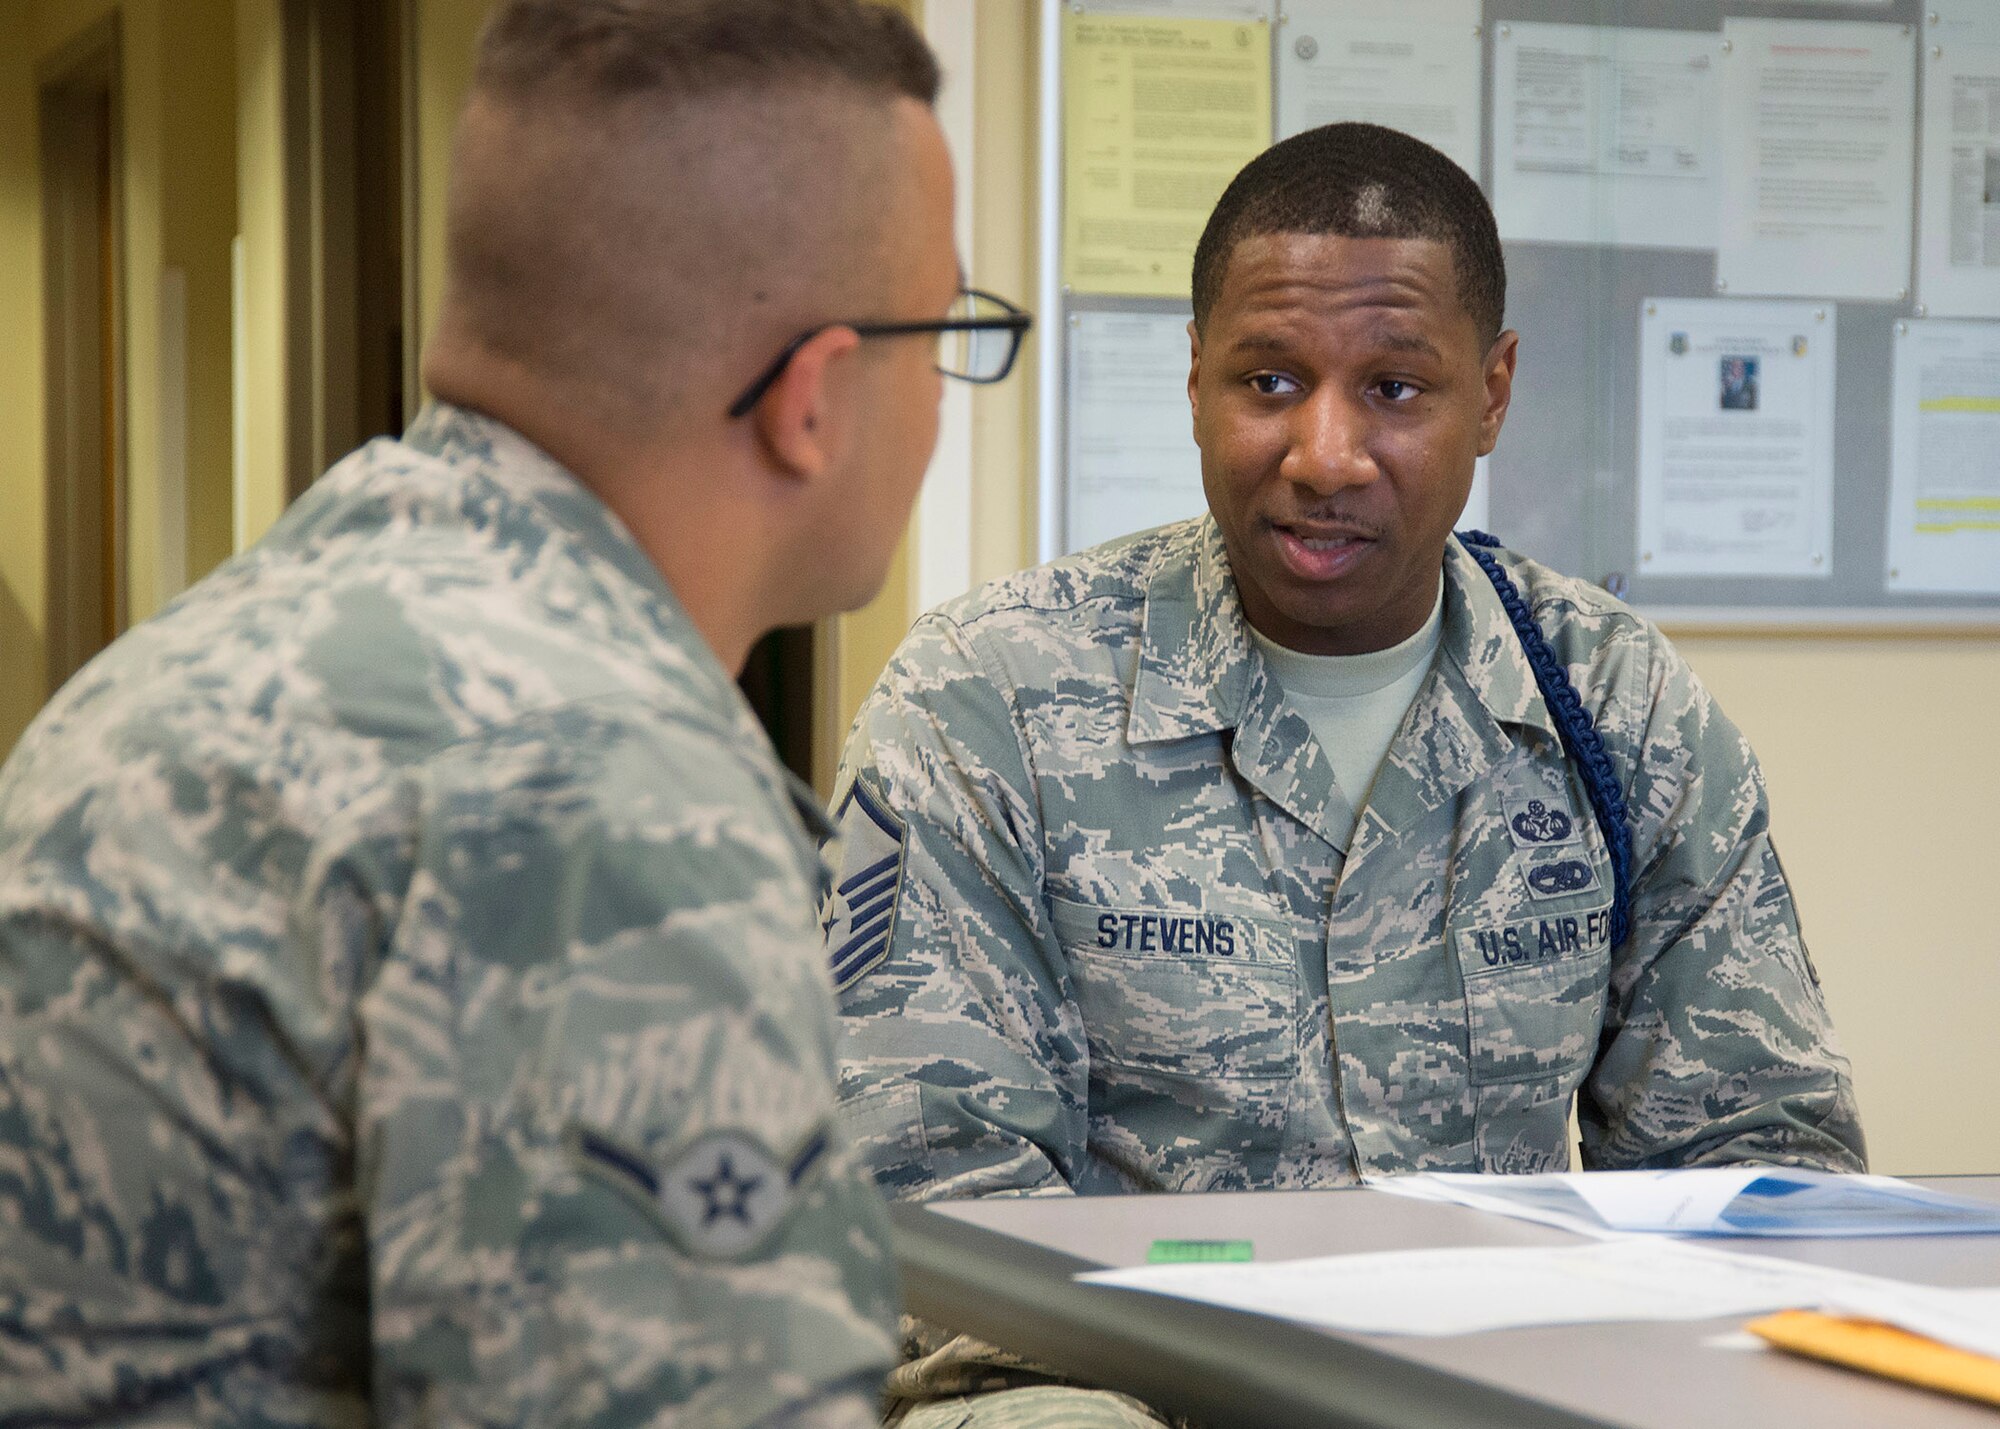 Master Sgt. Michael J. Stevens, United States Air Force School of Aerospace Medicine Military Training Flight chief, briefs a new arrival, Airman Andre Cade, checking into USAFSAM July 6, 2017, at Wright-Patterson Air Force Base, Ohio. Stevens, was named one of the Air Force’s 12 Outstanding Airmen of the Year. (U.S. Air Force photo by R.J. Oriez)